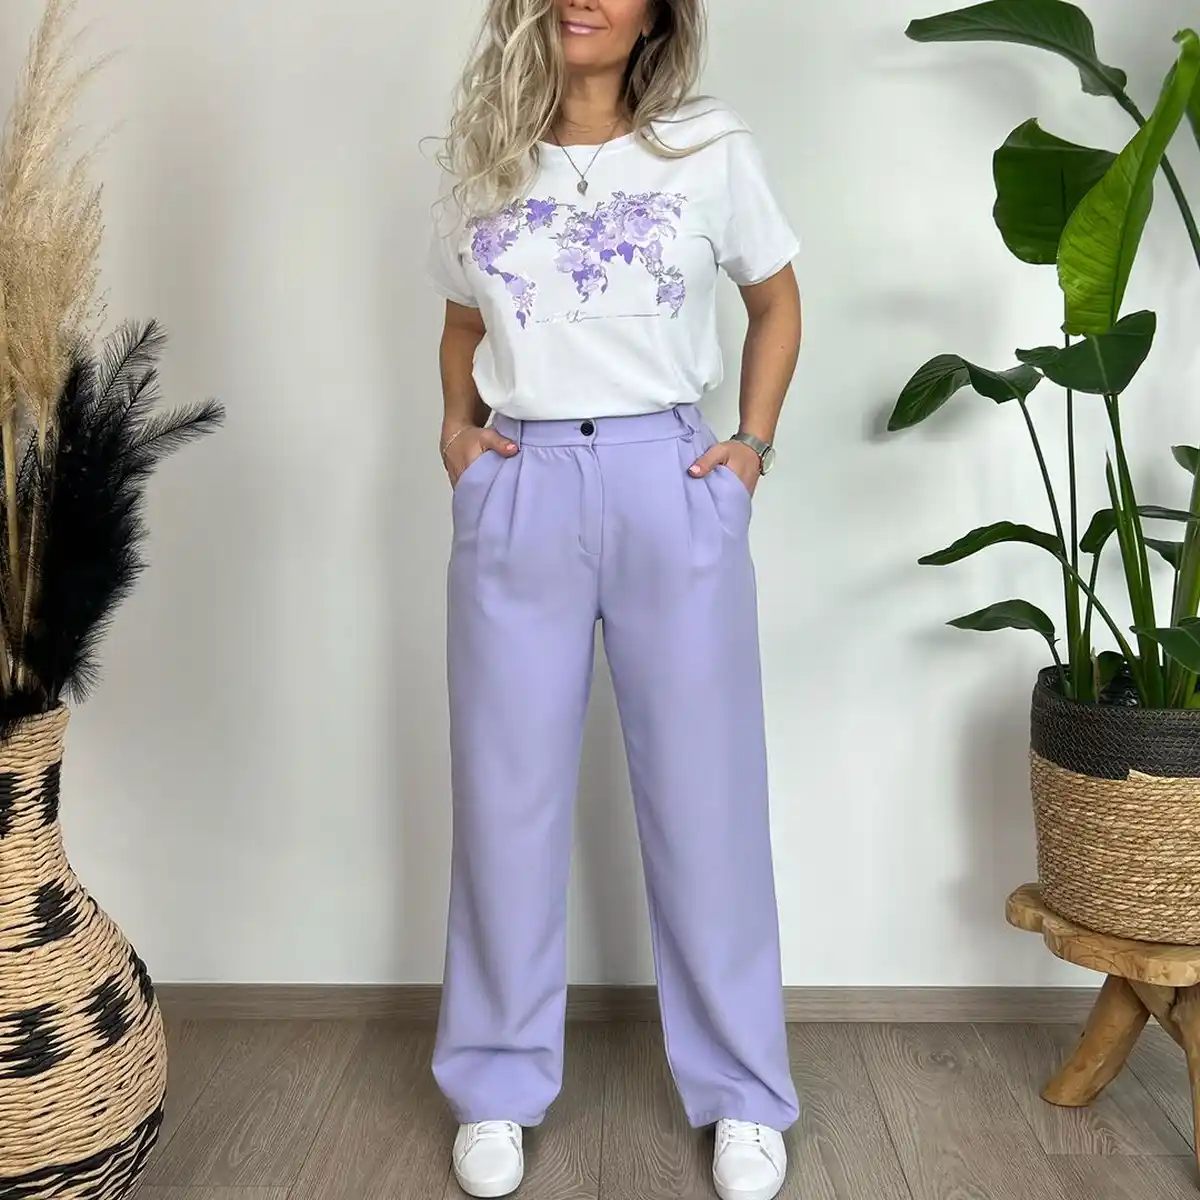 What to wear with purple pants? Best outfit ideas for females